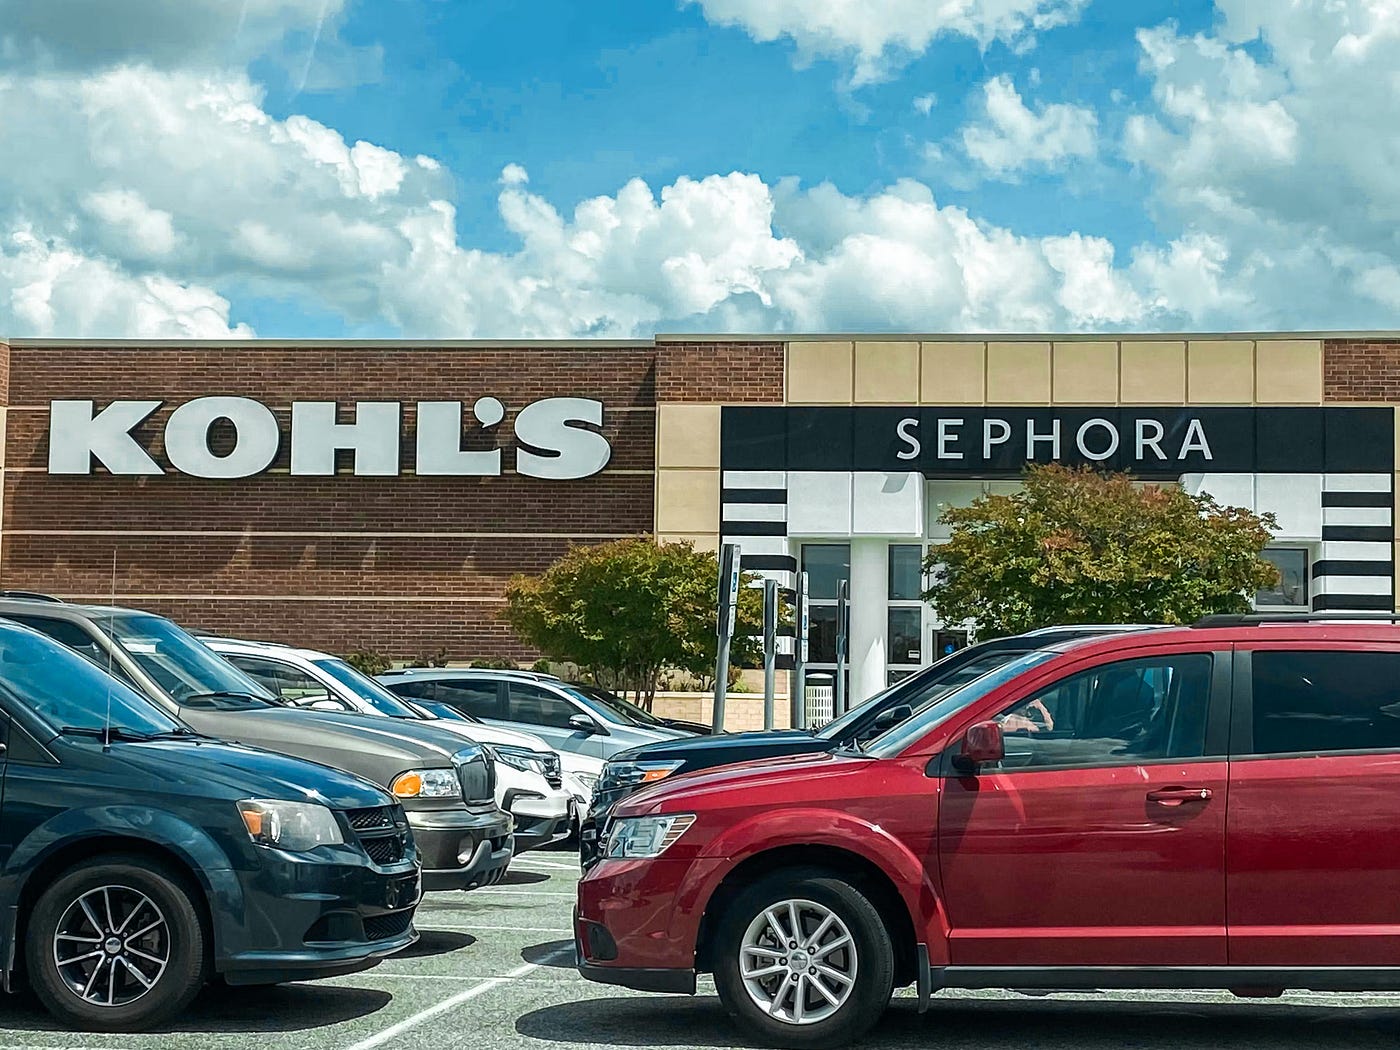 Rethinking Retail: A New Marketing Strategy for Kohl's Success, by Aashna  Jain